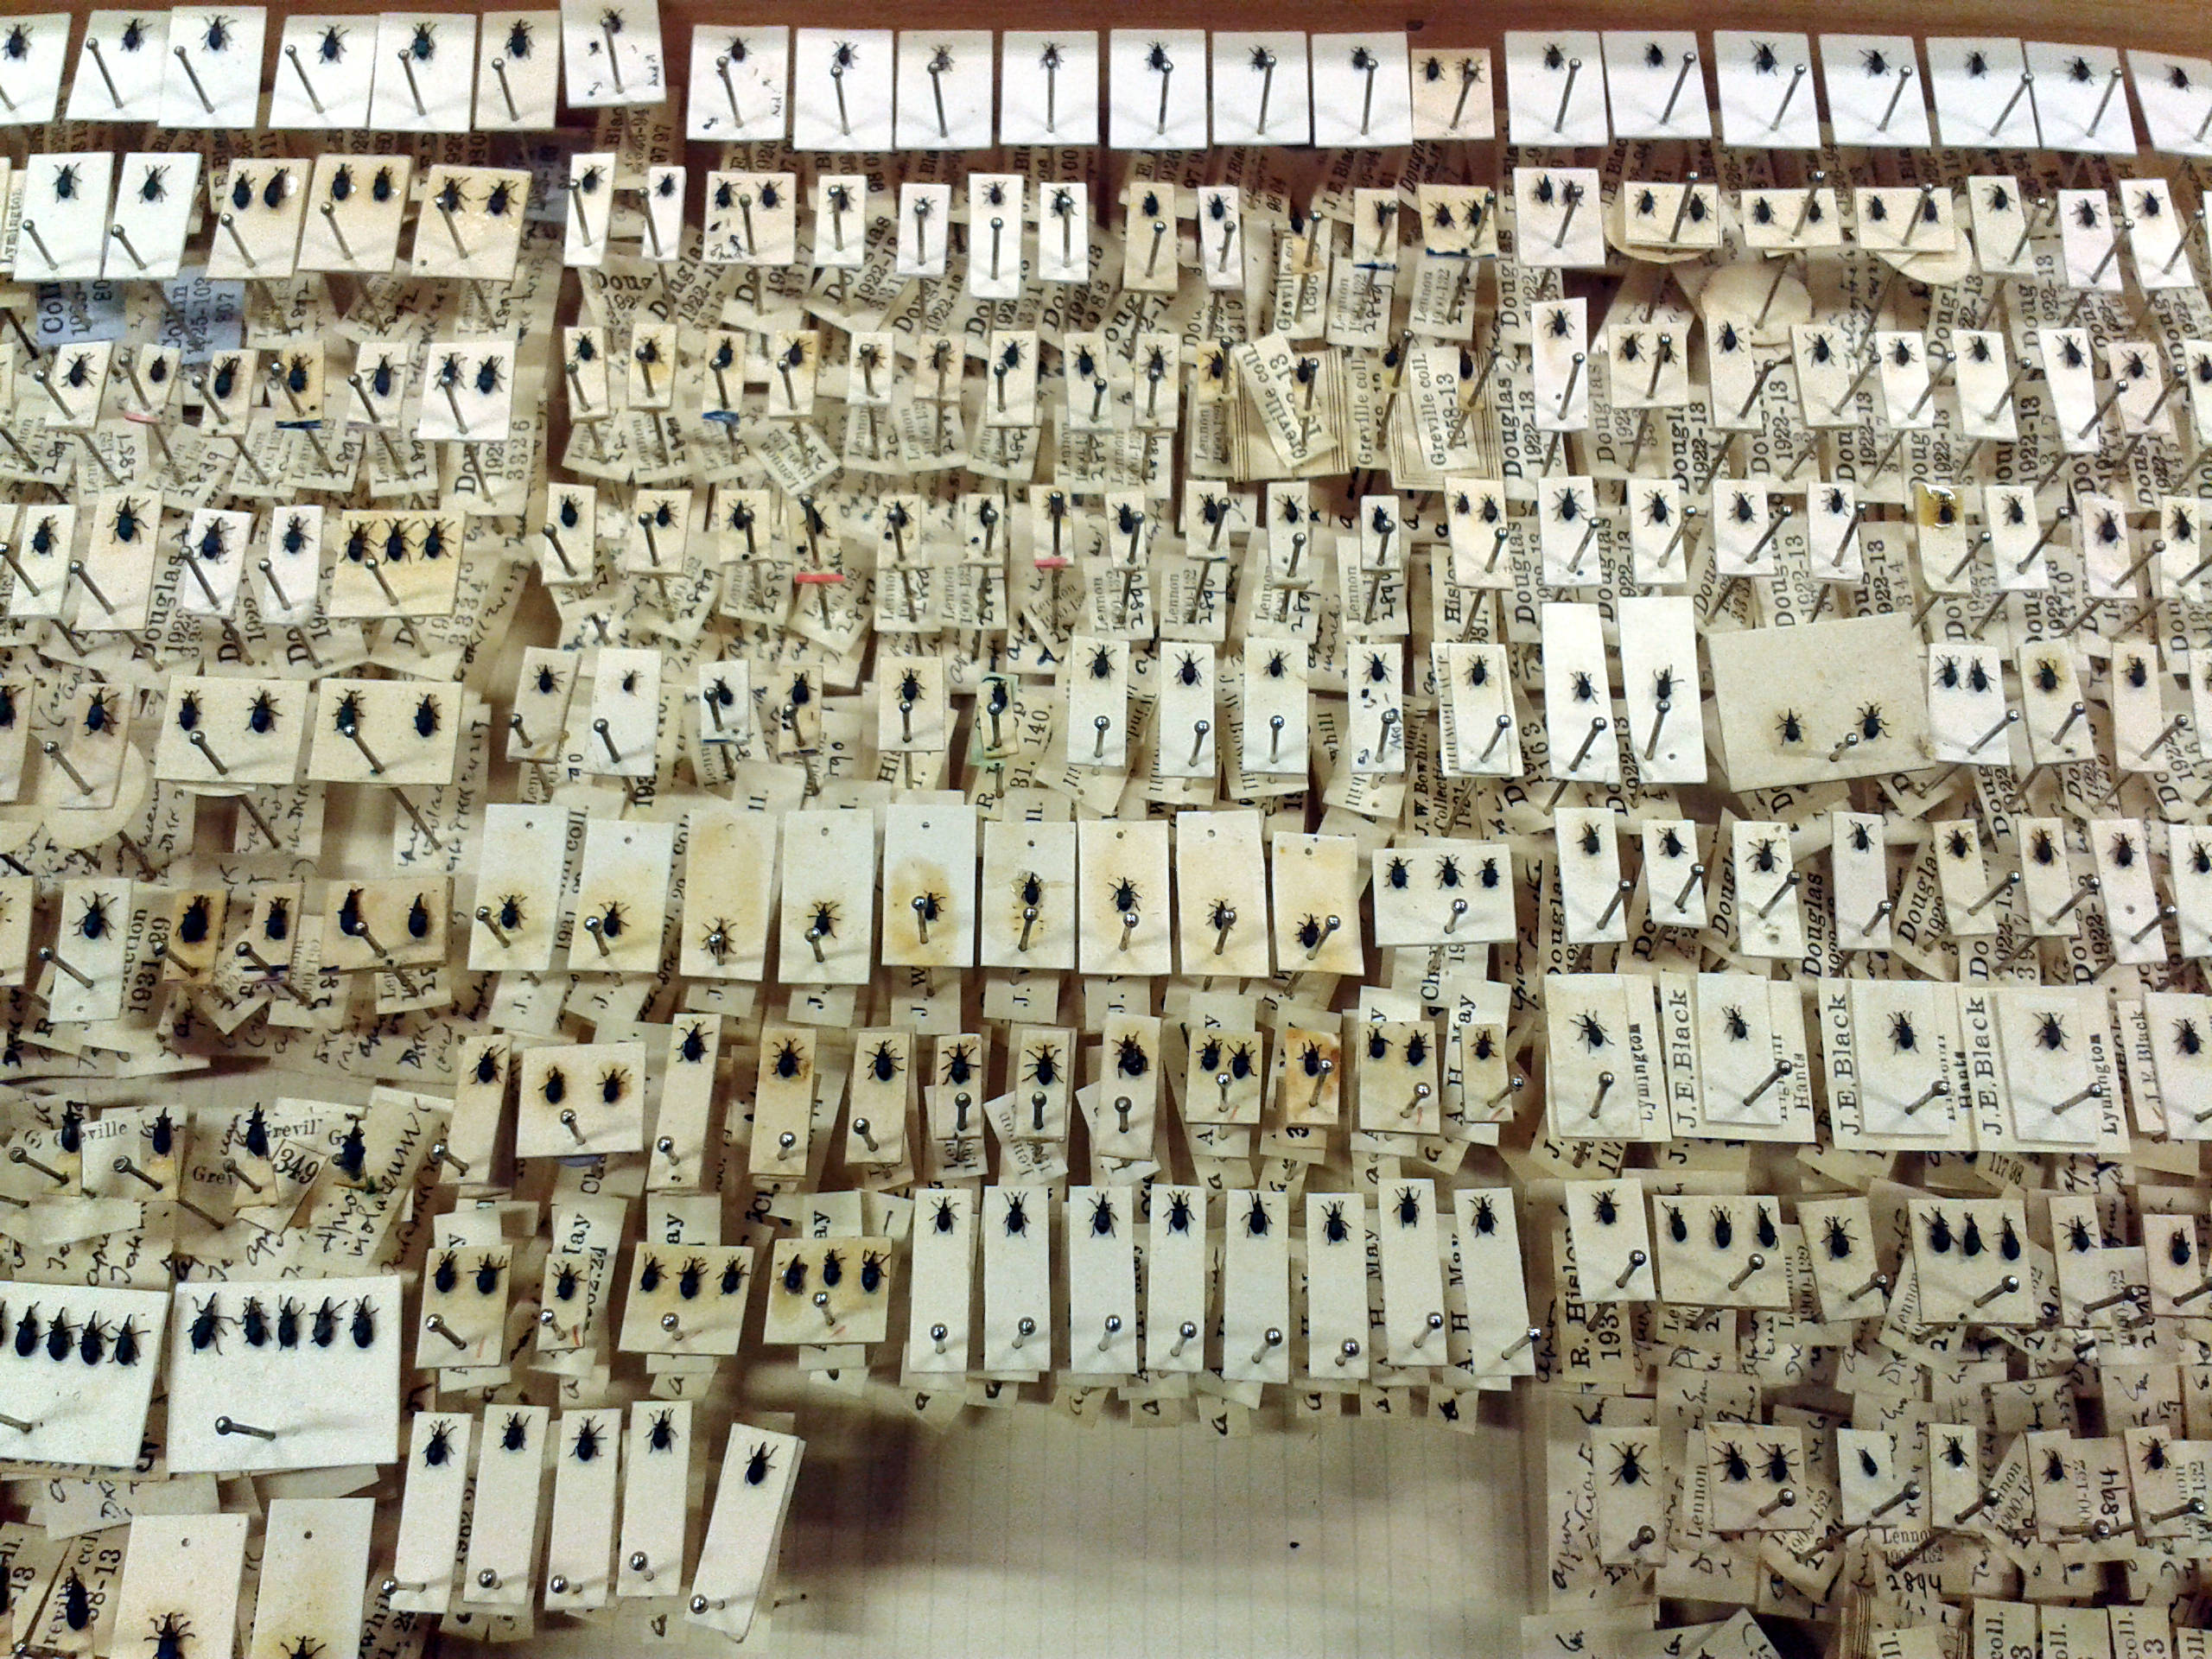 Museum Collections are Critical for Identifying Invertebrates